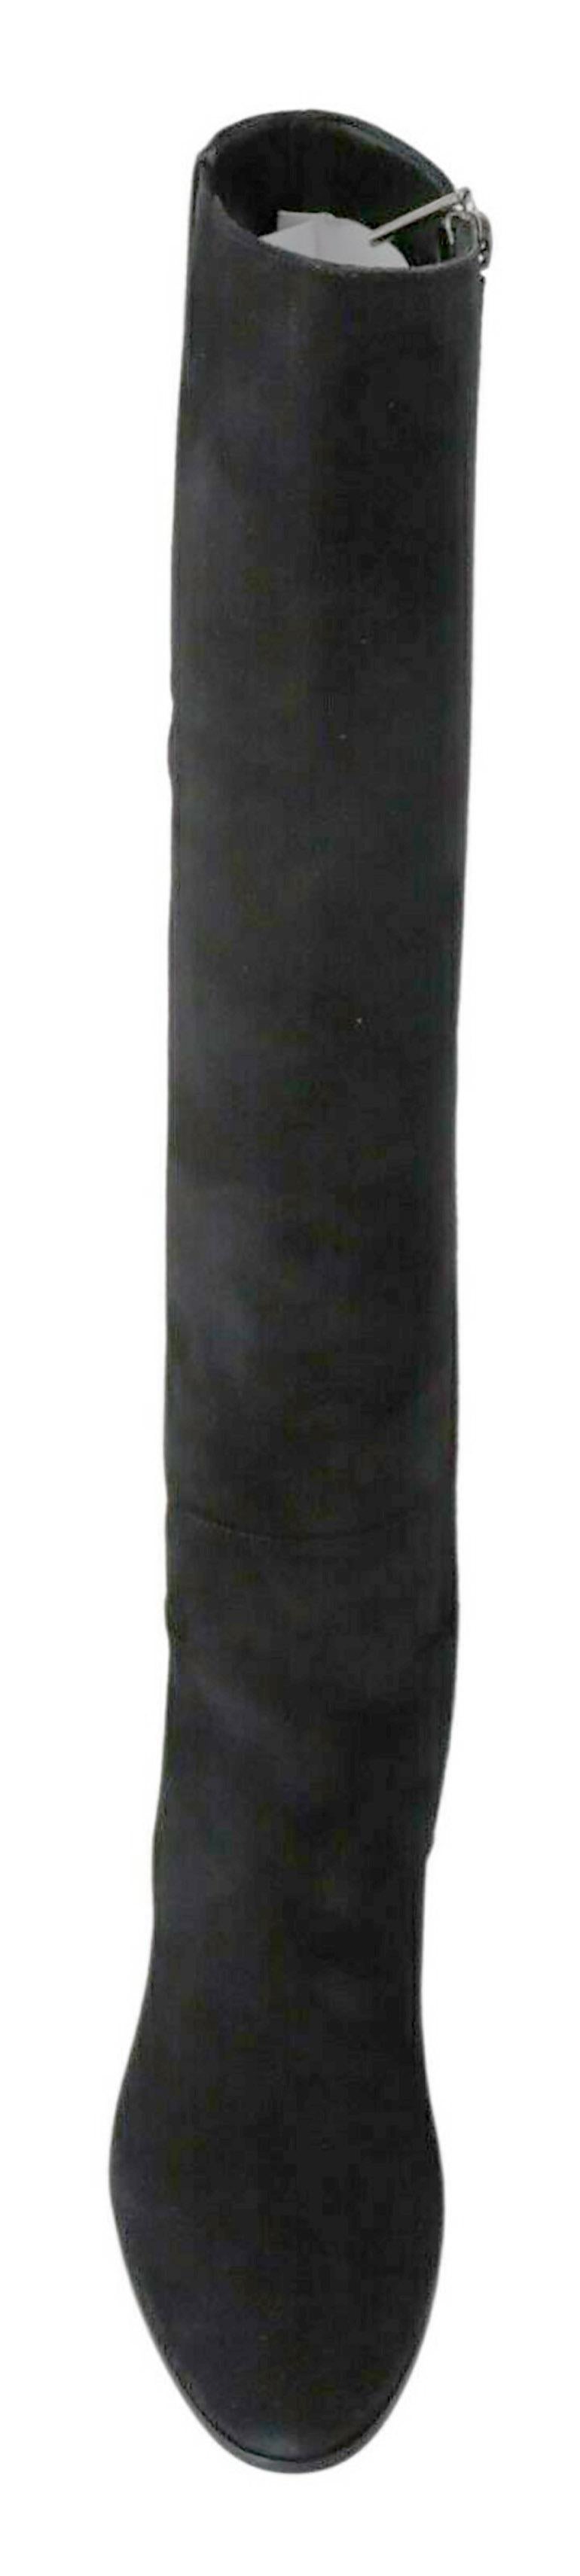 Women's Dolce & Gabbana Black Suede Leather Flat Knee High Boots With Zipper DG Logo For Sale